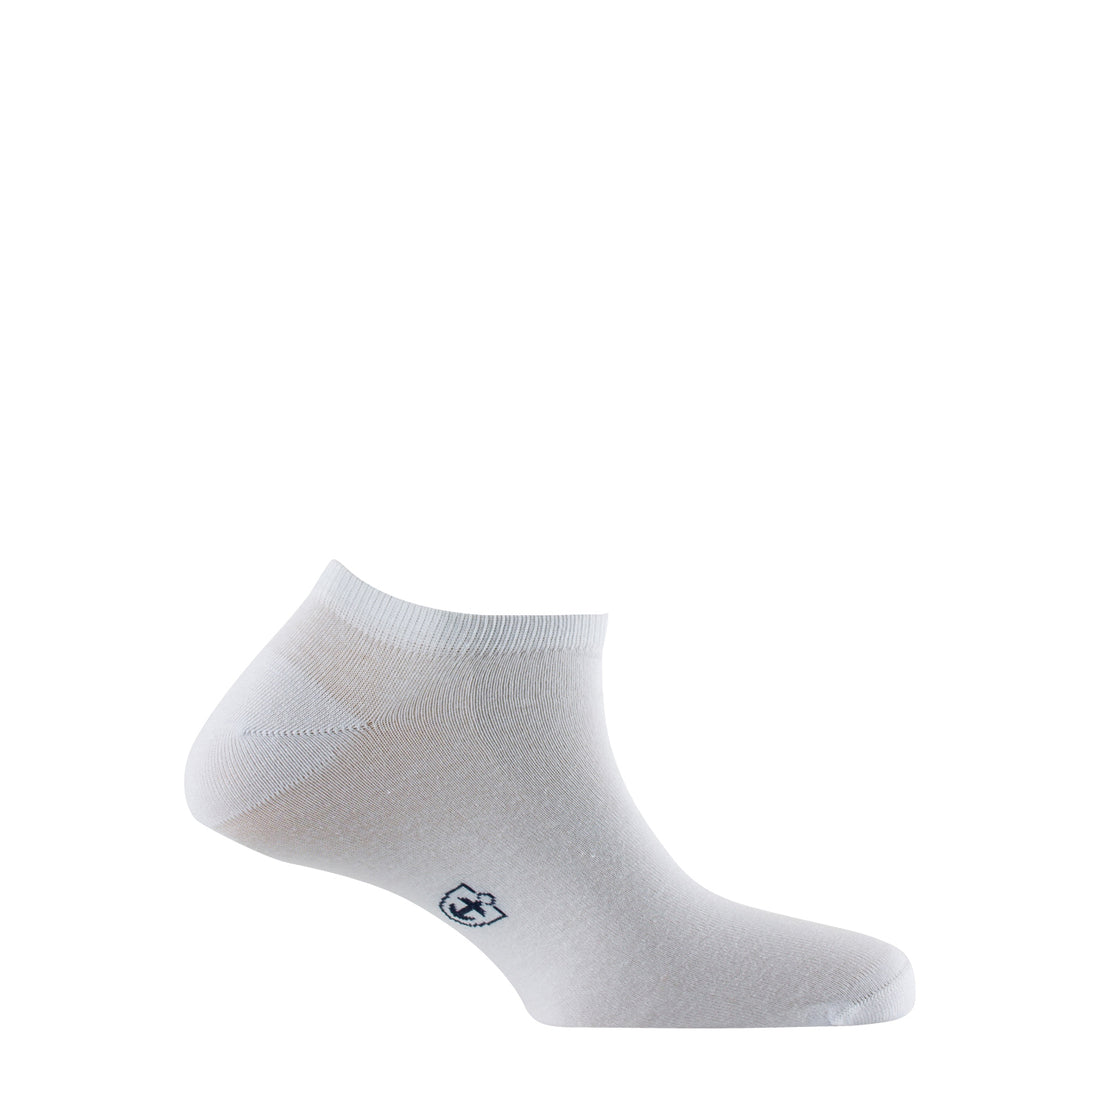 Pack of 3 pairs of WHITE Stretch socks